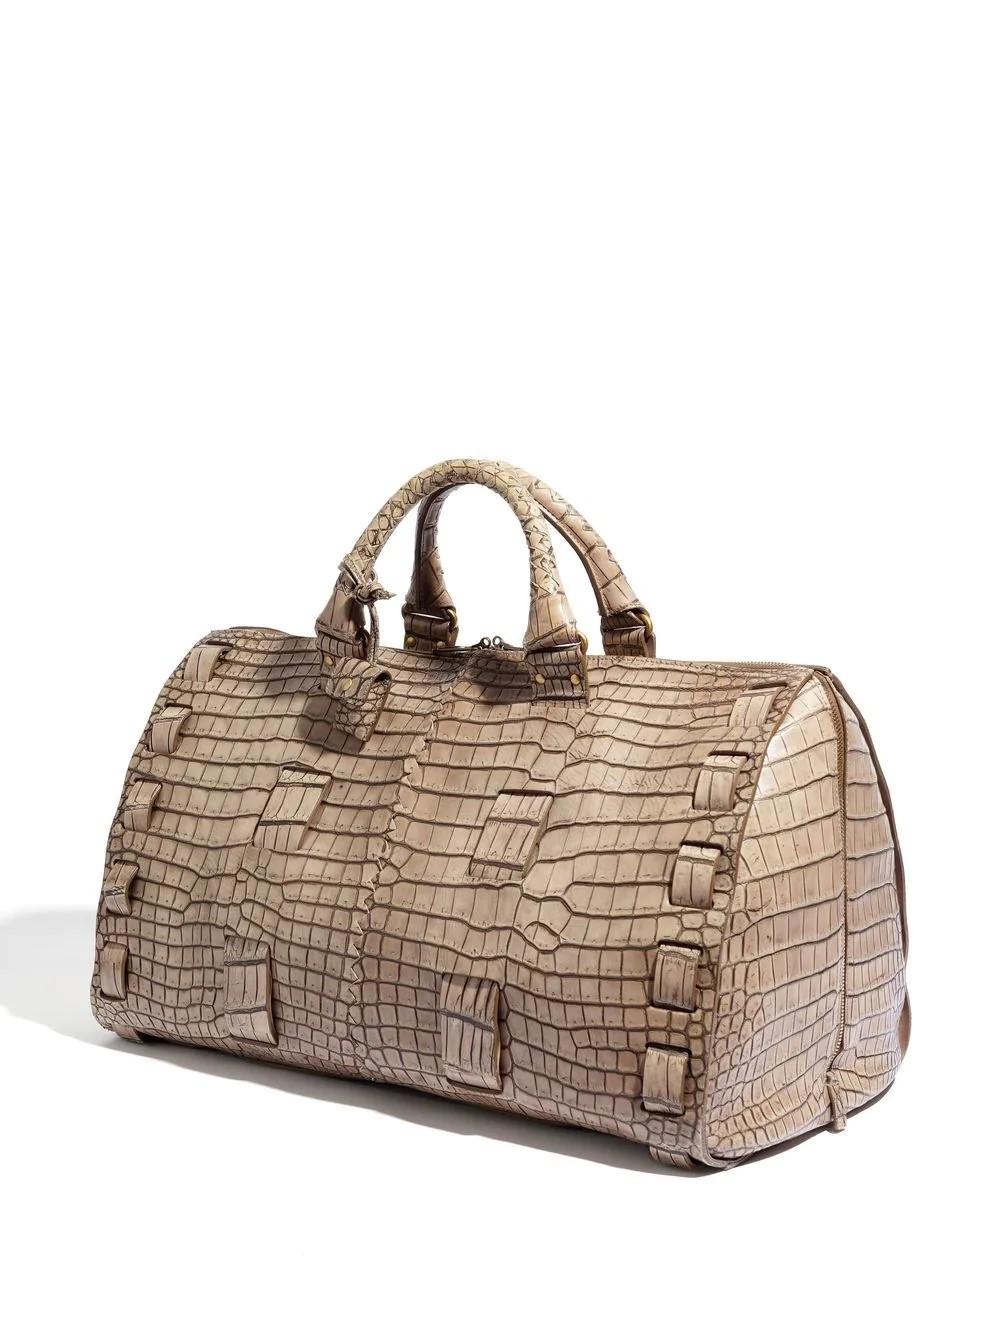 Spacious enough for long weekends away, this pre-owned Bottega Veneta holdall has been crafted in Italy from prime leather in neutral tones. The bag features two leather top handles in the house's signature intrecciato weave, which was first